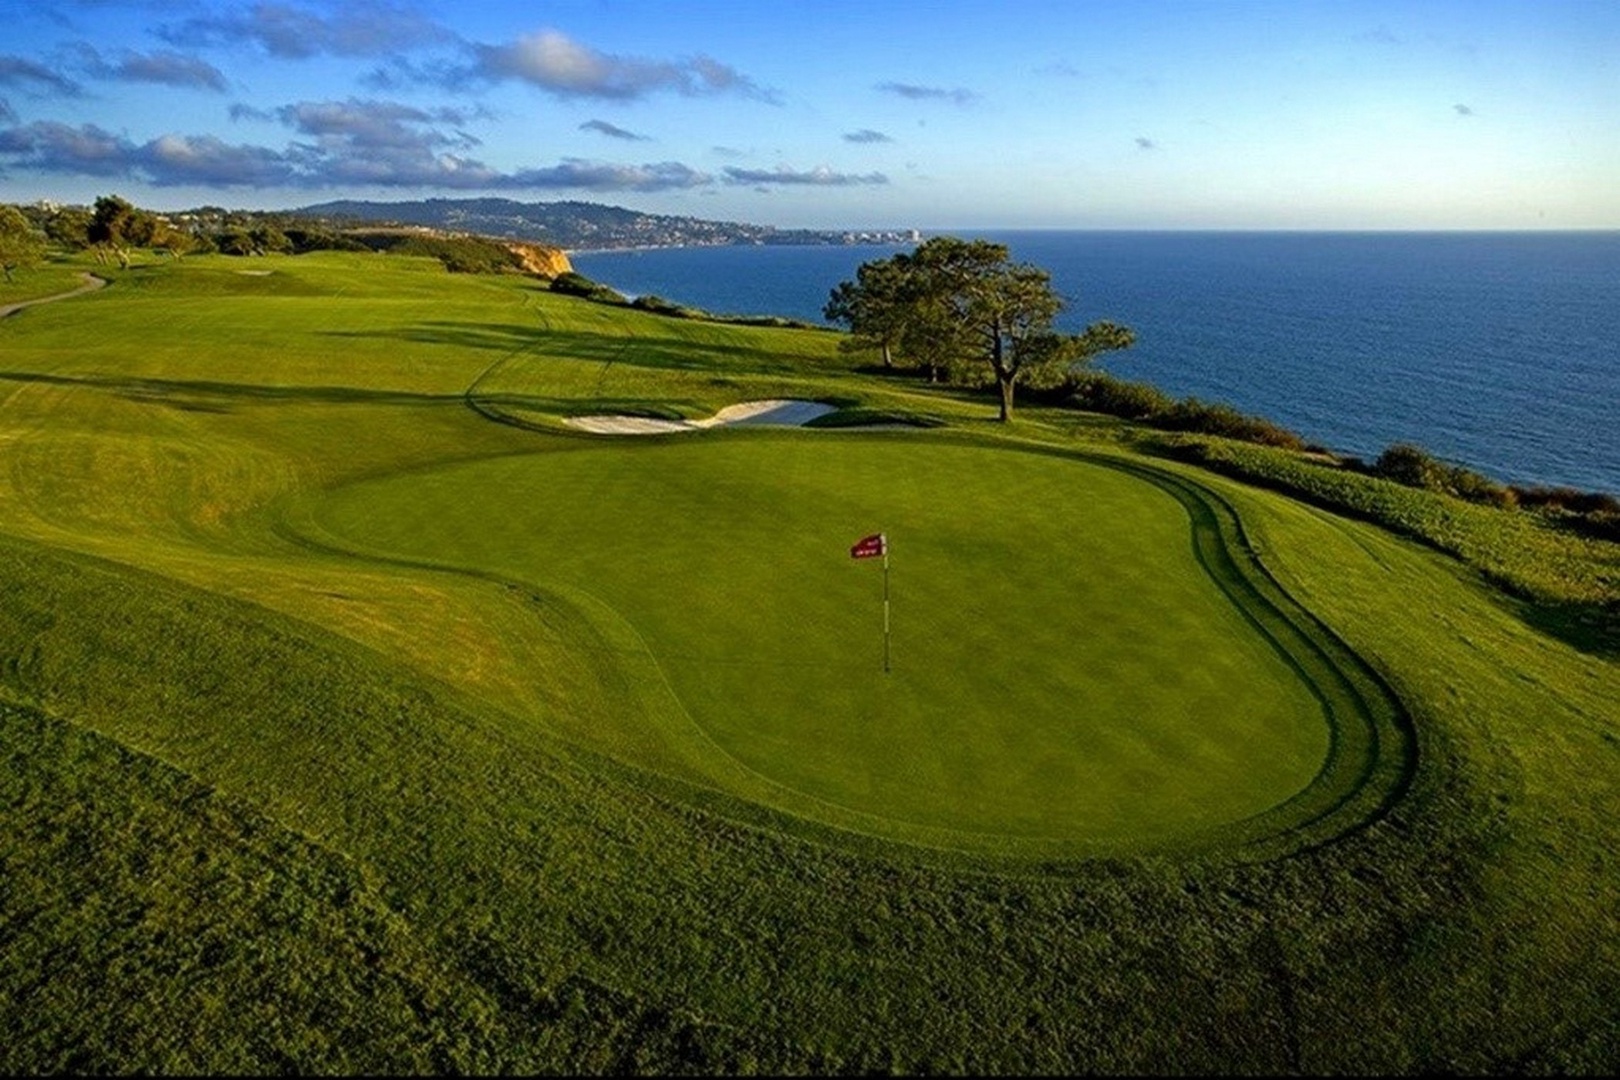 Nearby Torrey Pines golf course